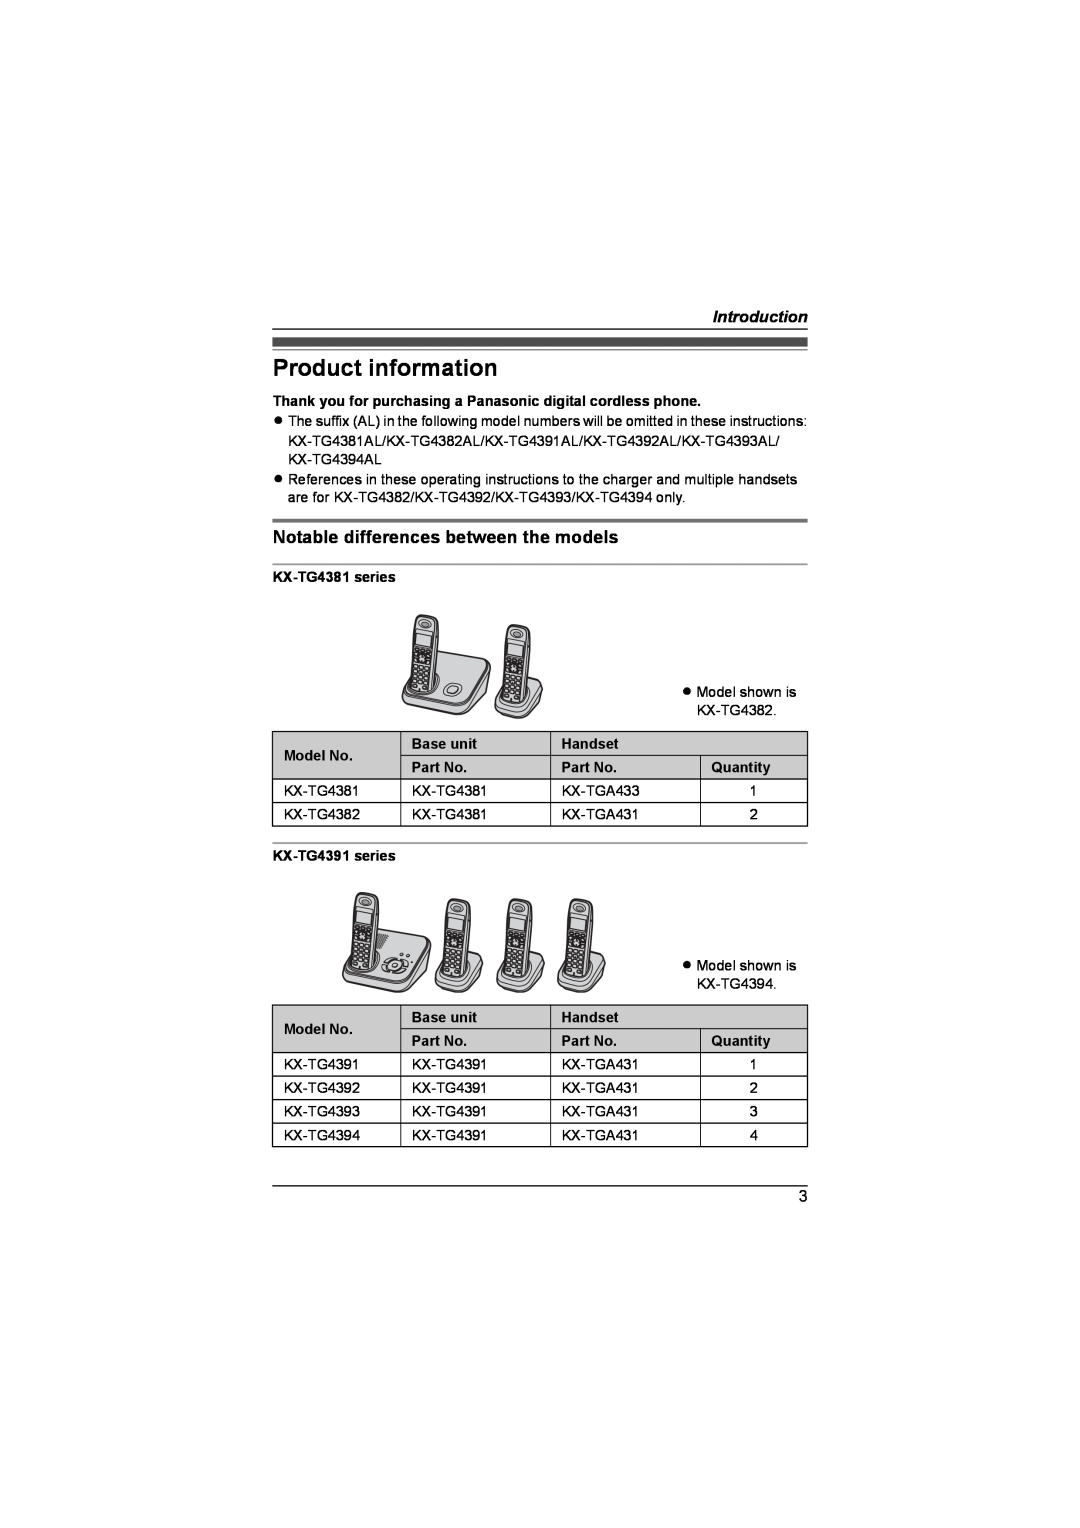 Panasonic KX-TG4394AL Product information, Notable differences between the models, Introduction, KX-TG4381 series, Handset 